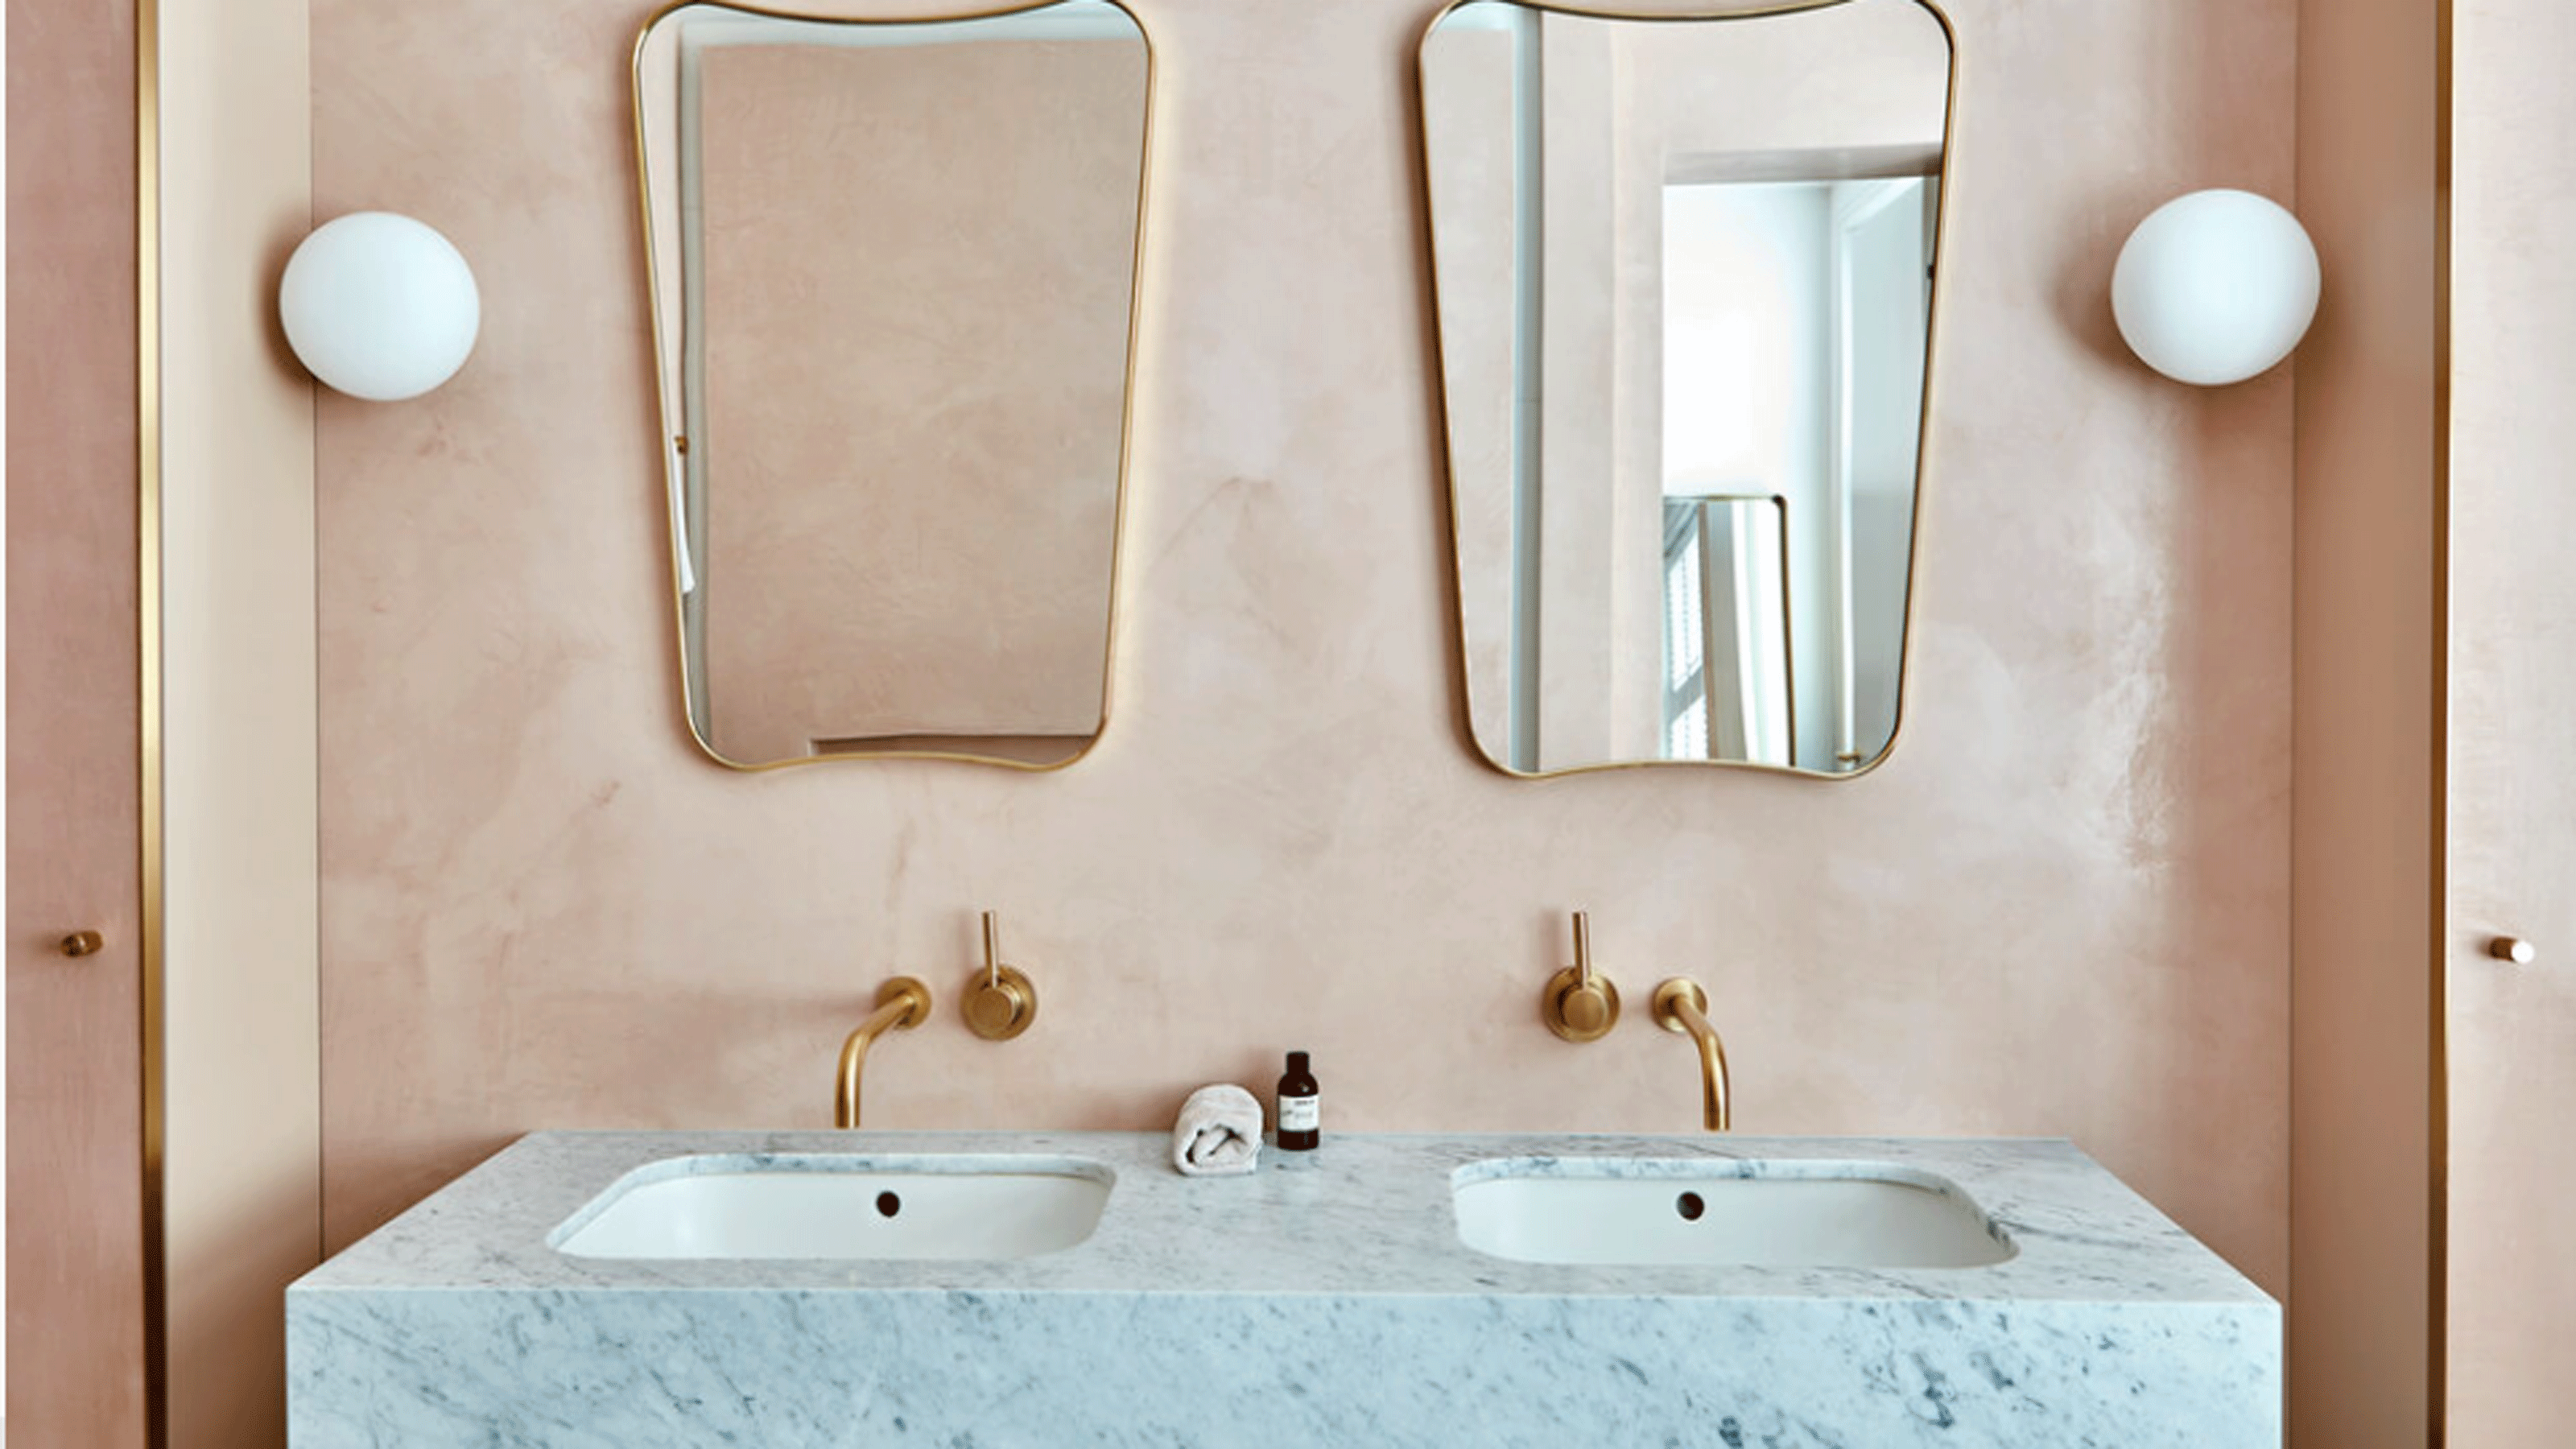 Pink tadelakt bathroom walls with two shield mirrors and double sinks